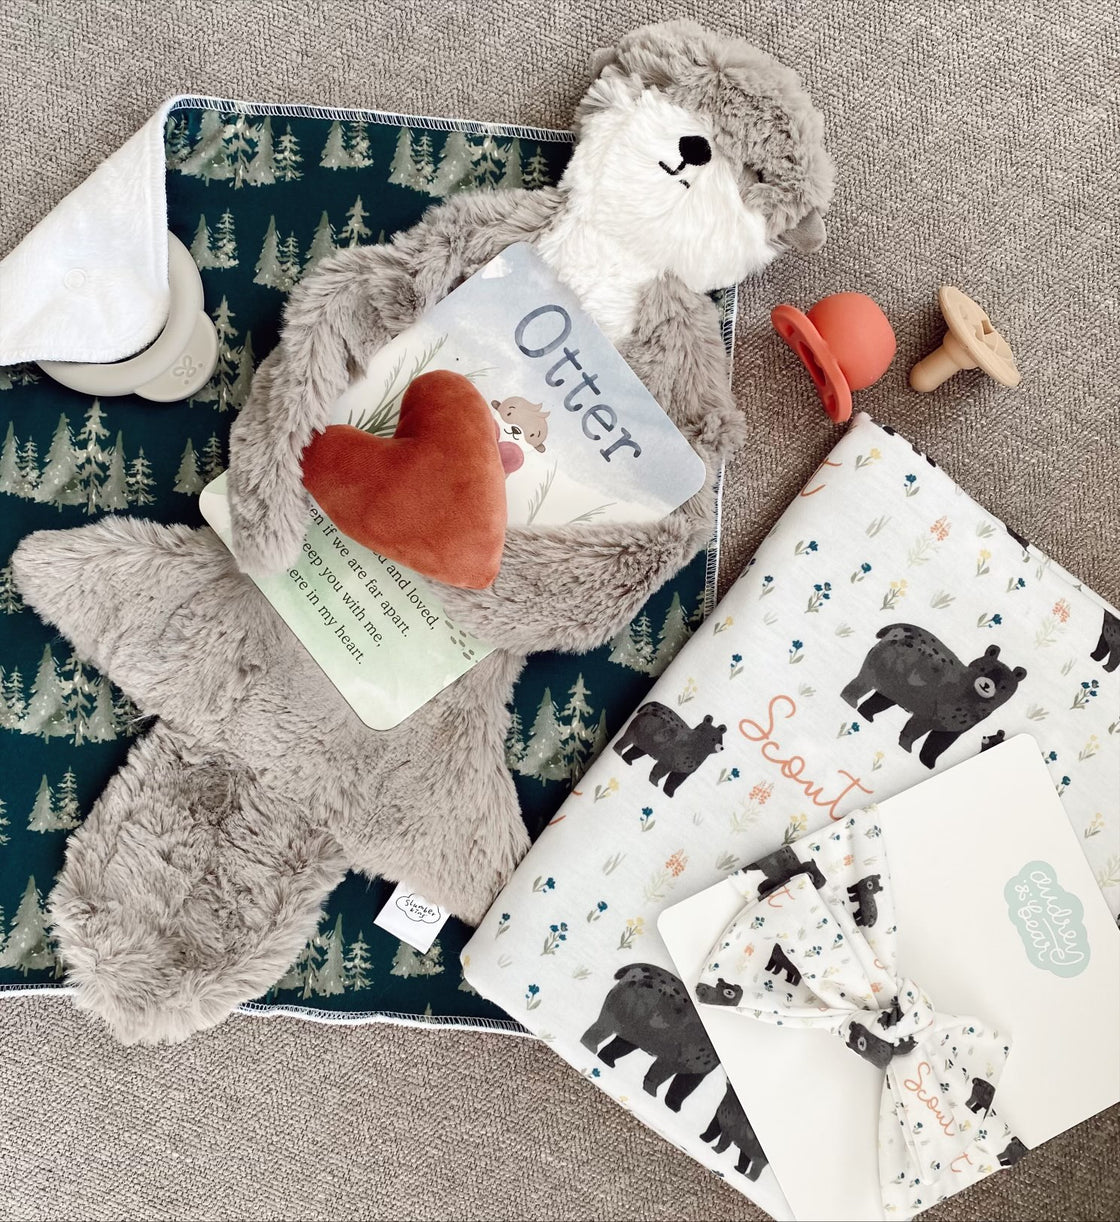 The Audrey & Bear Gifting Guide